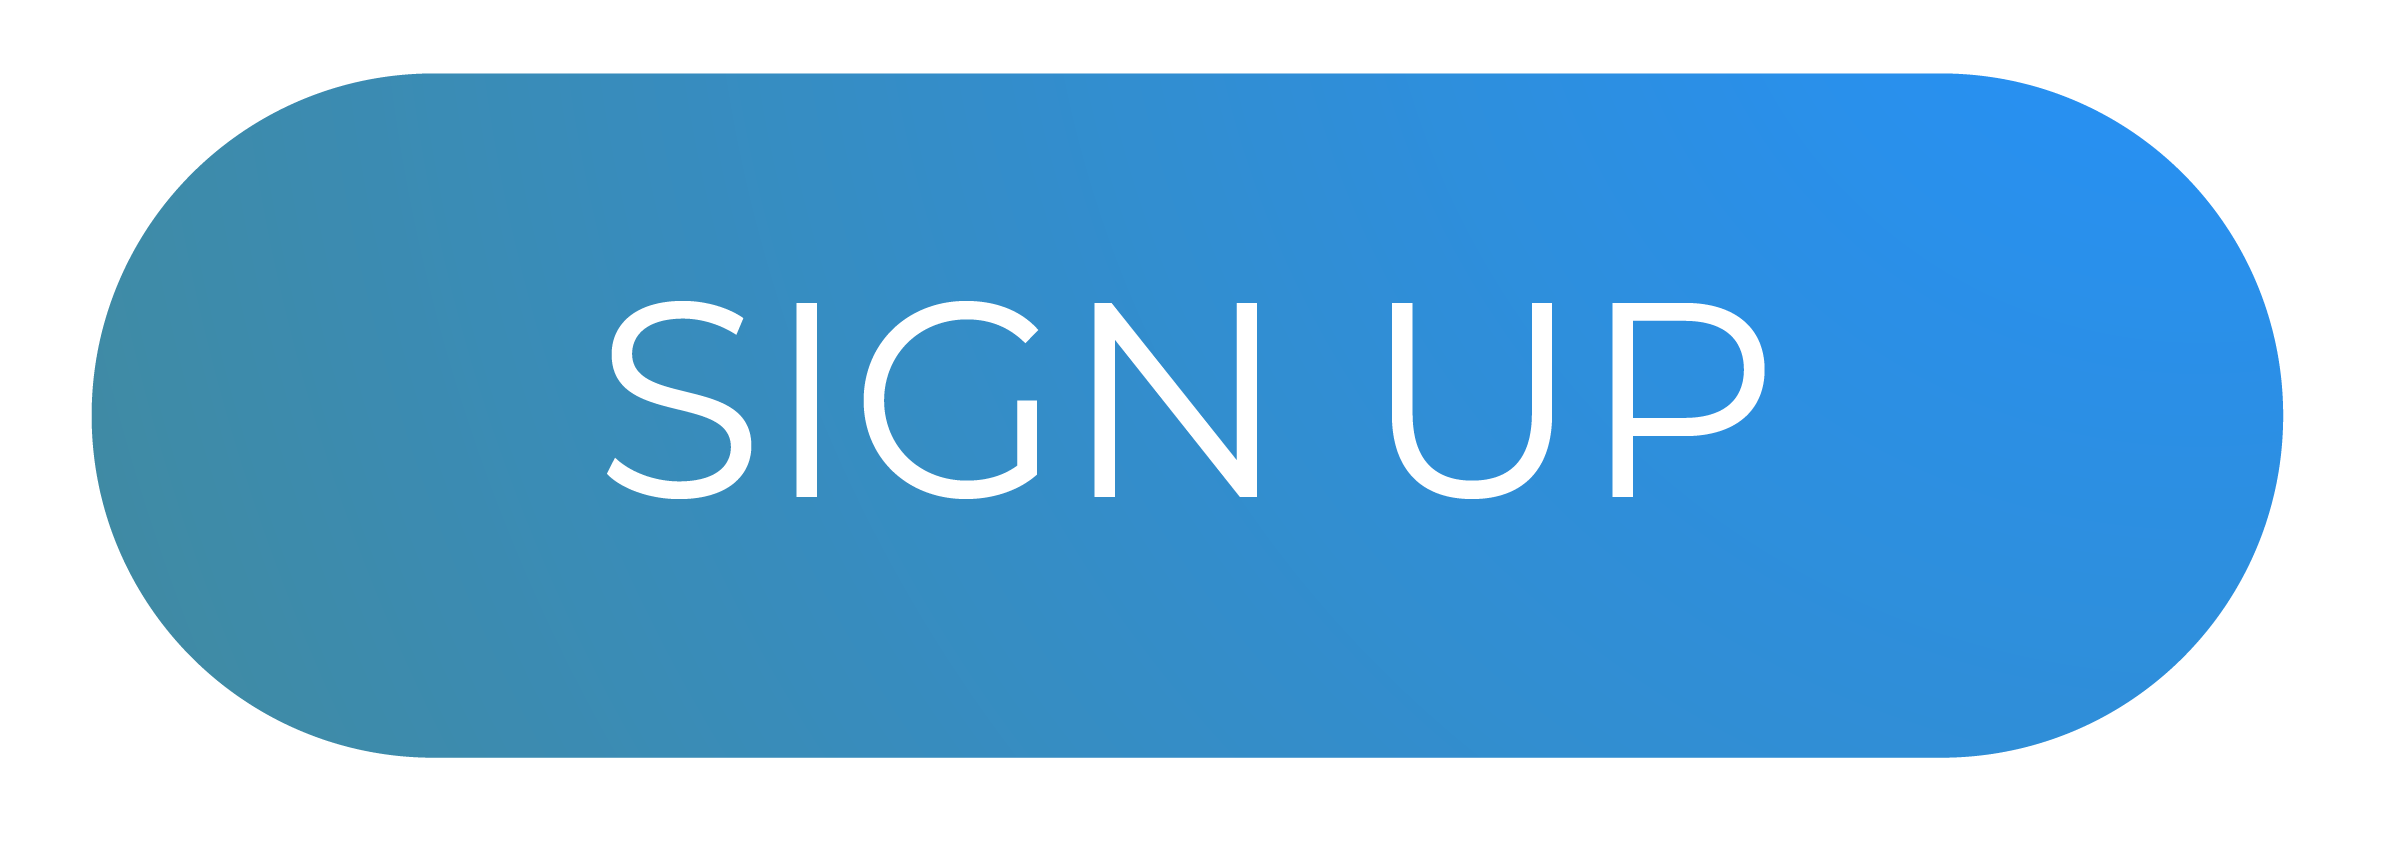 Sign Up PNG Images Transparent Background | PNG Play